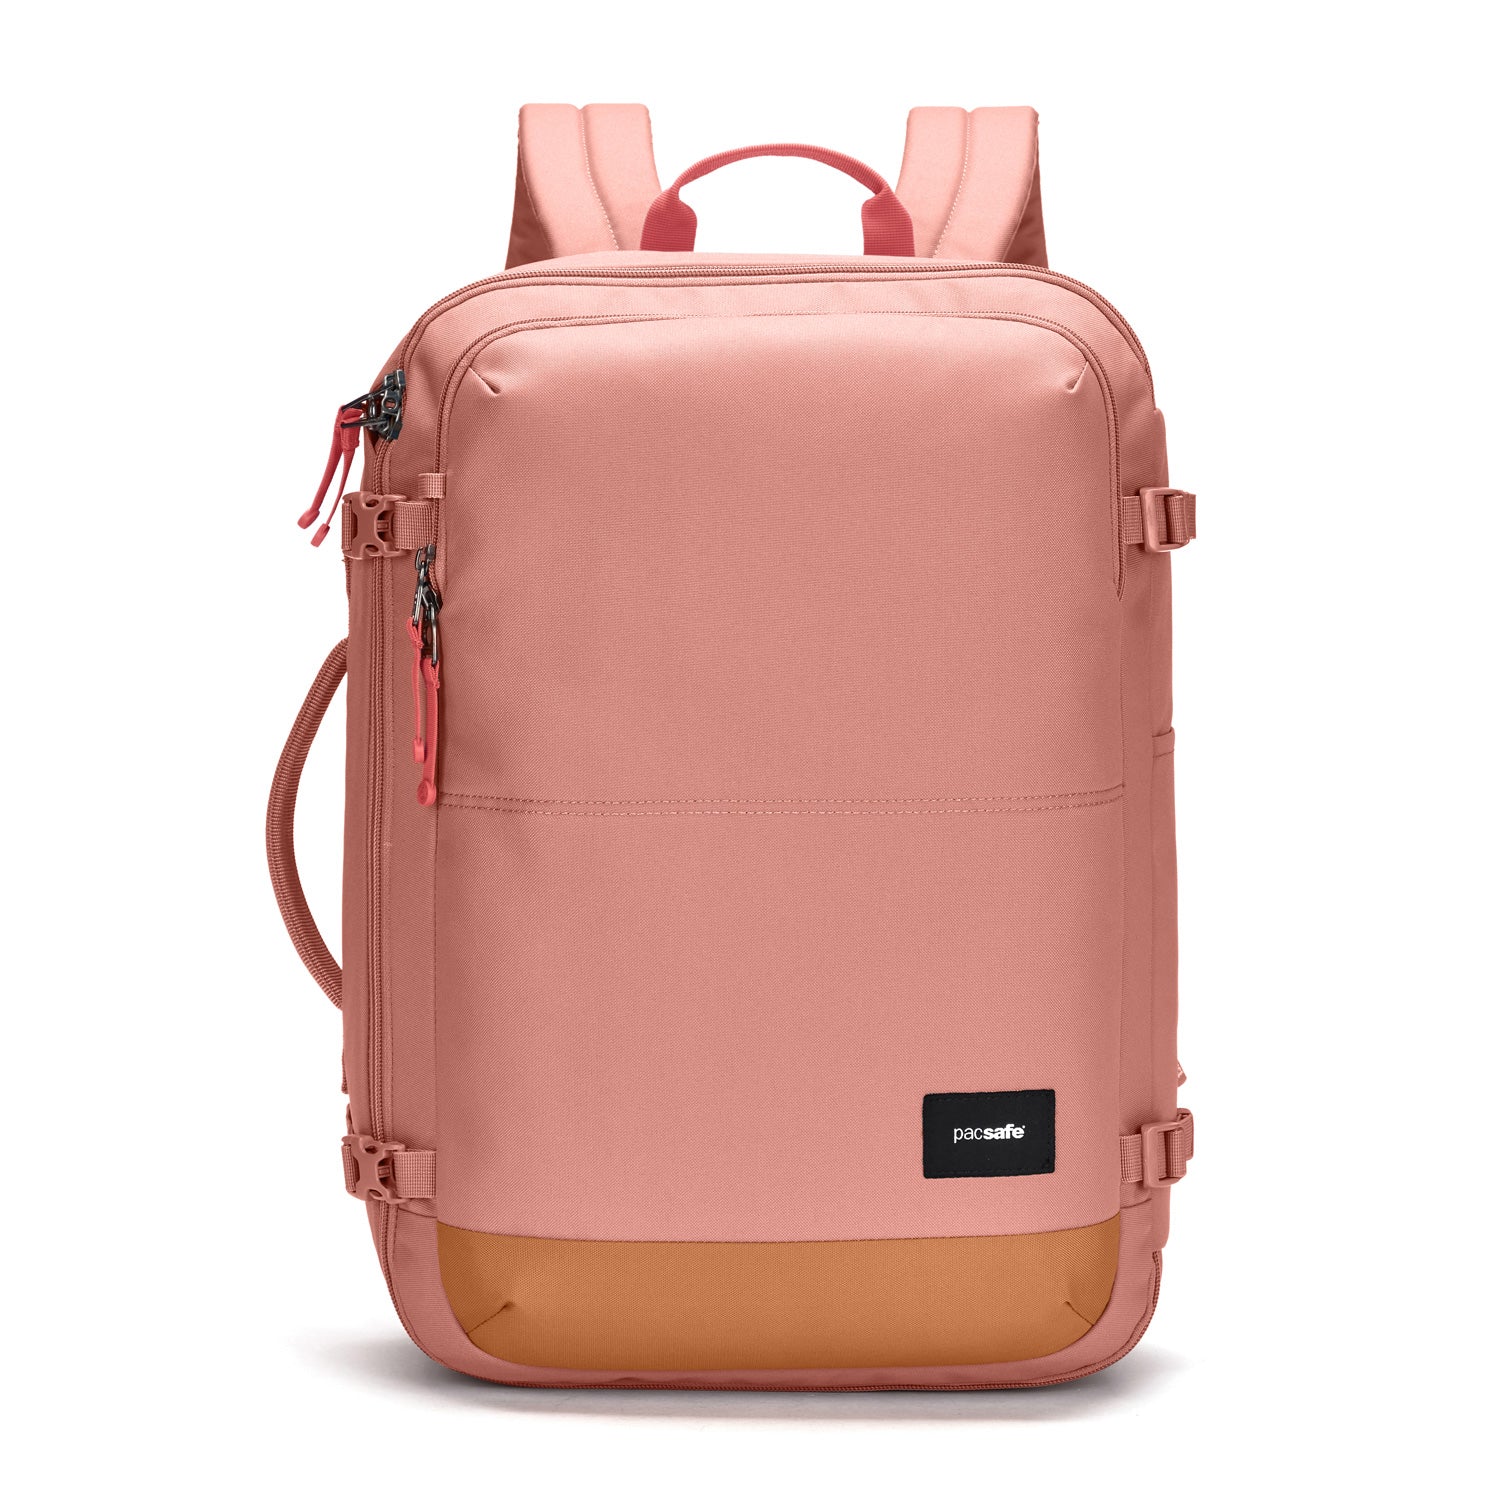 Pacsafe - Pacsafe GO Carry-on Backpack 34L - Rose